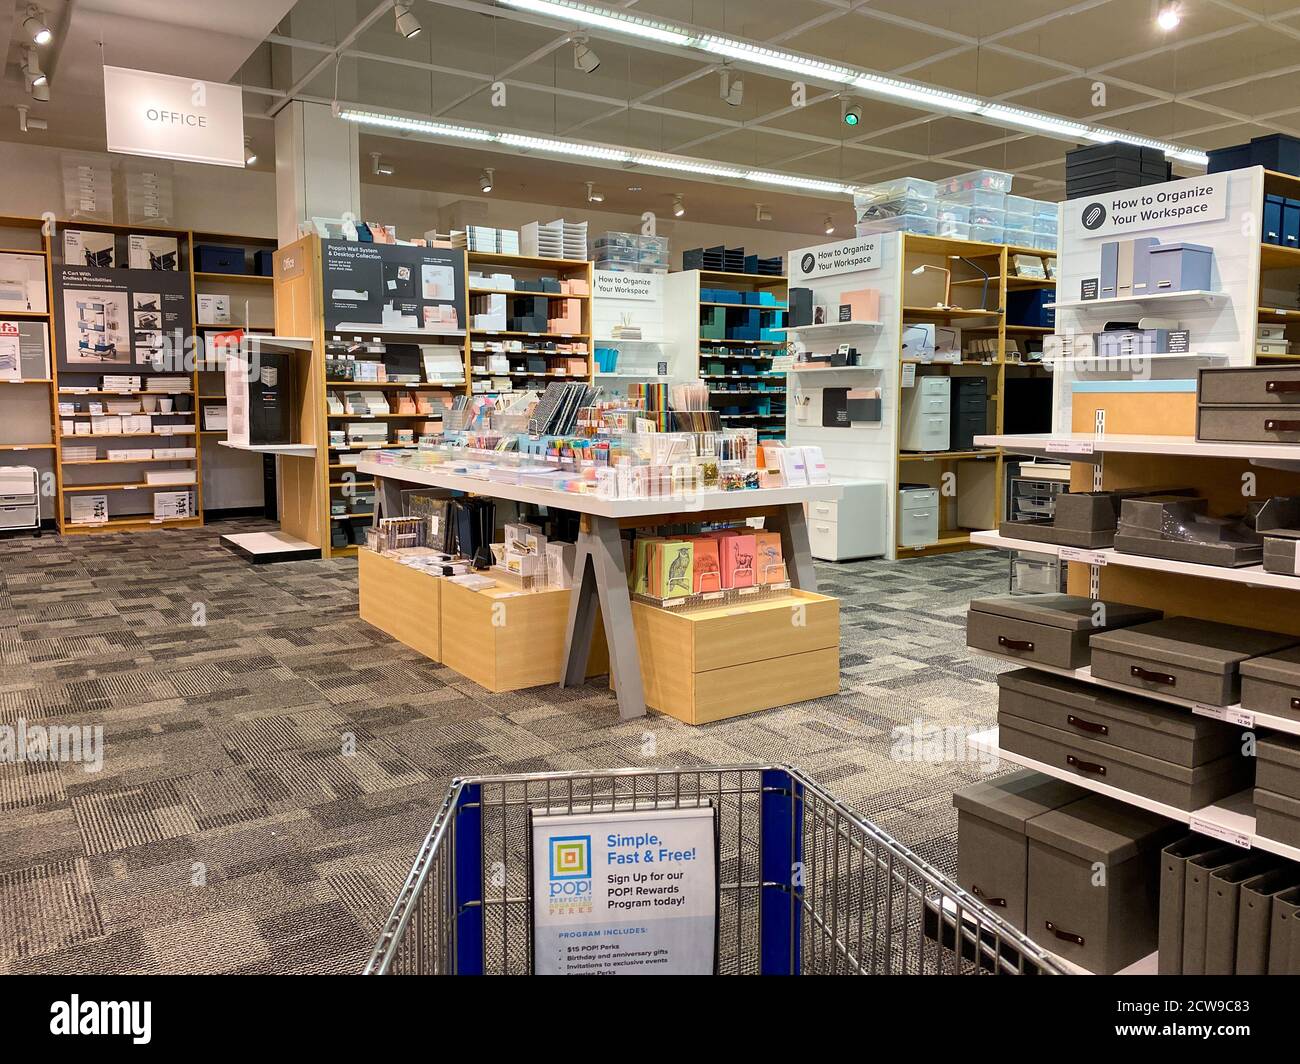 https://c8.alamy.com/comp/2CW9C83/orlando-flusa-92820-a-display-of-office-organization-products-at-the-container-store-retail-organizing-store-2CW9C83.jpg